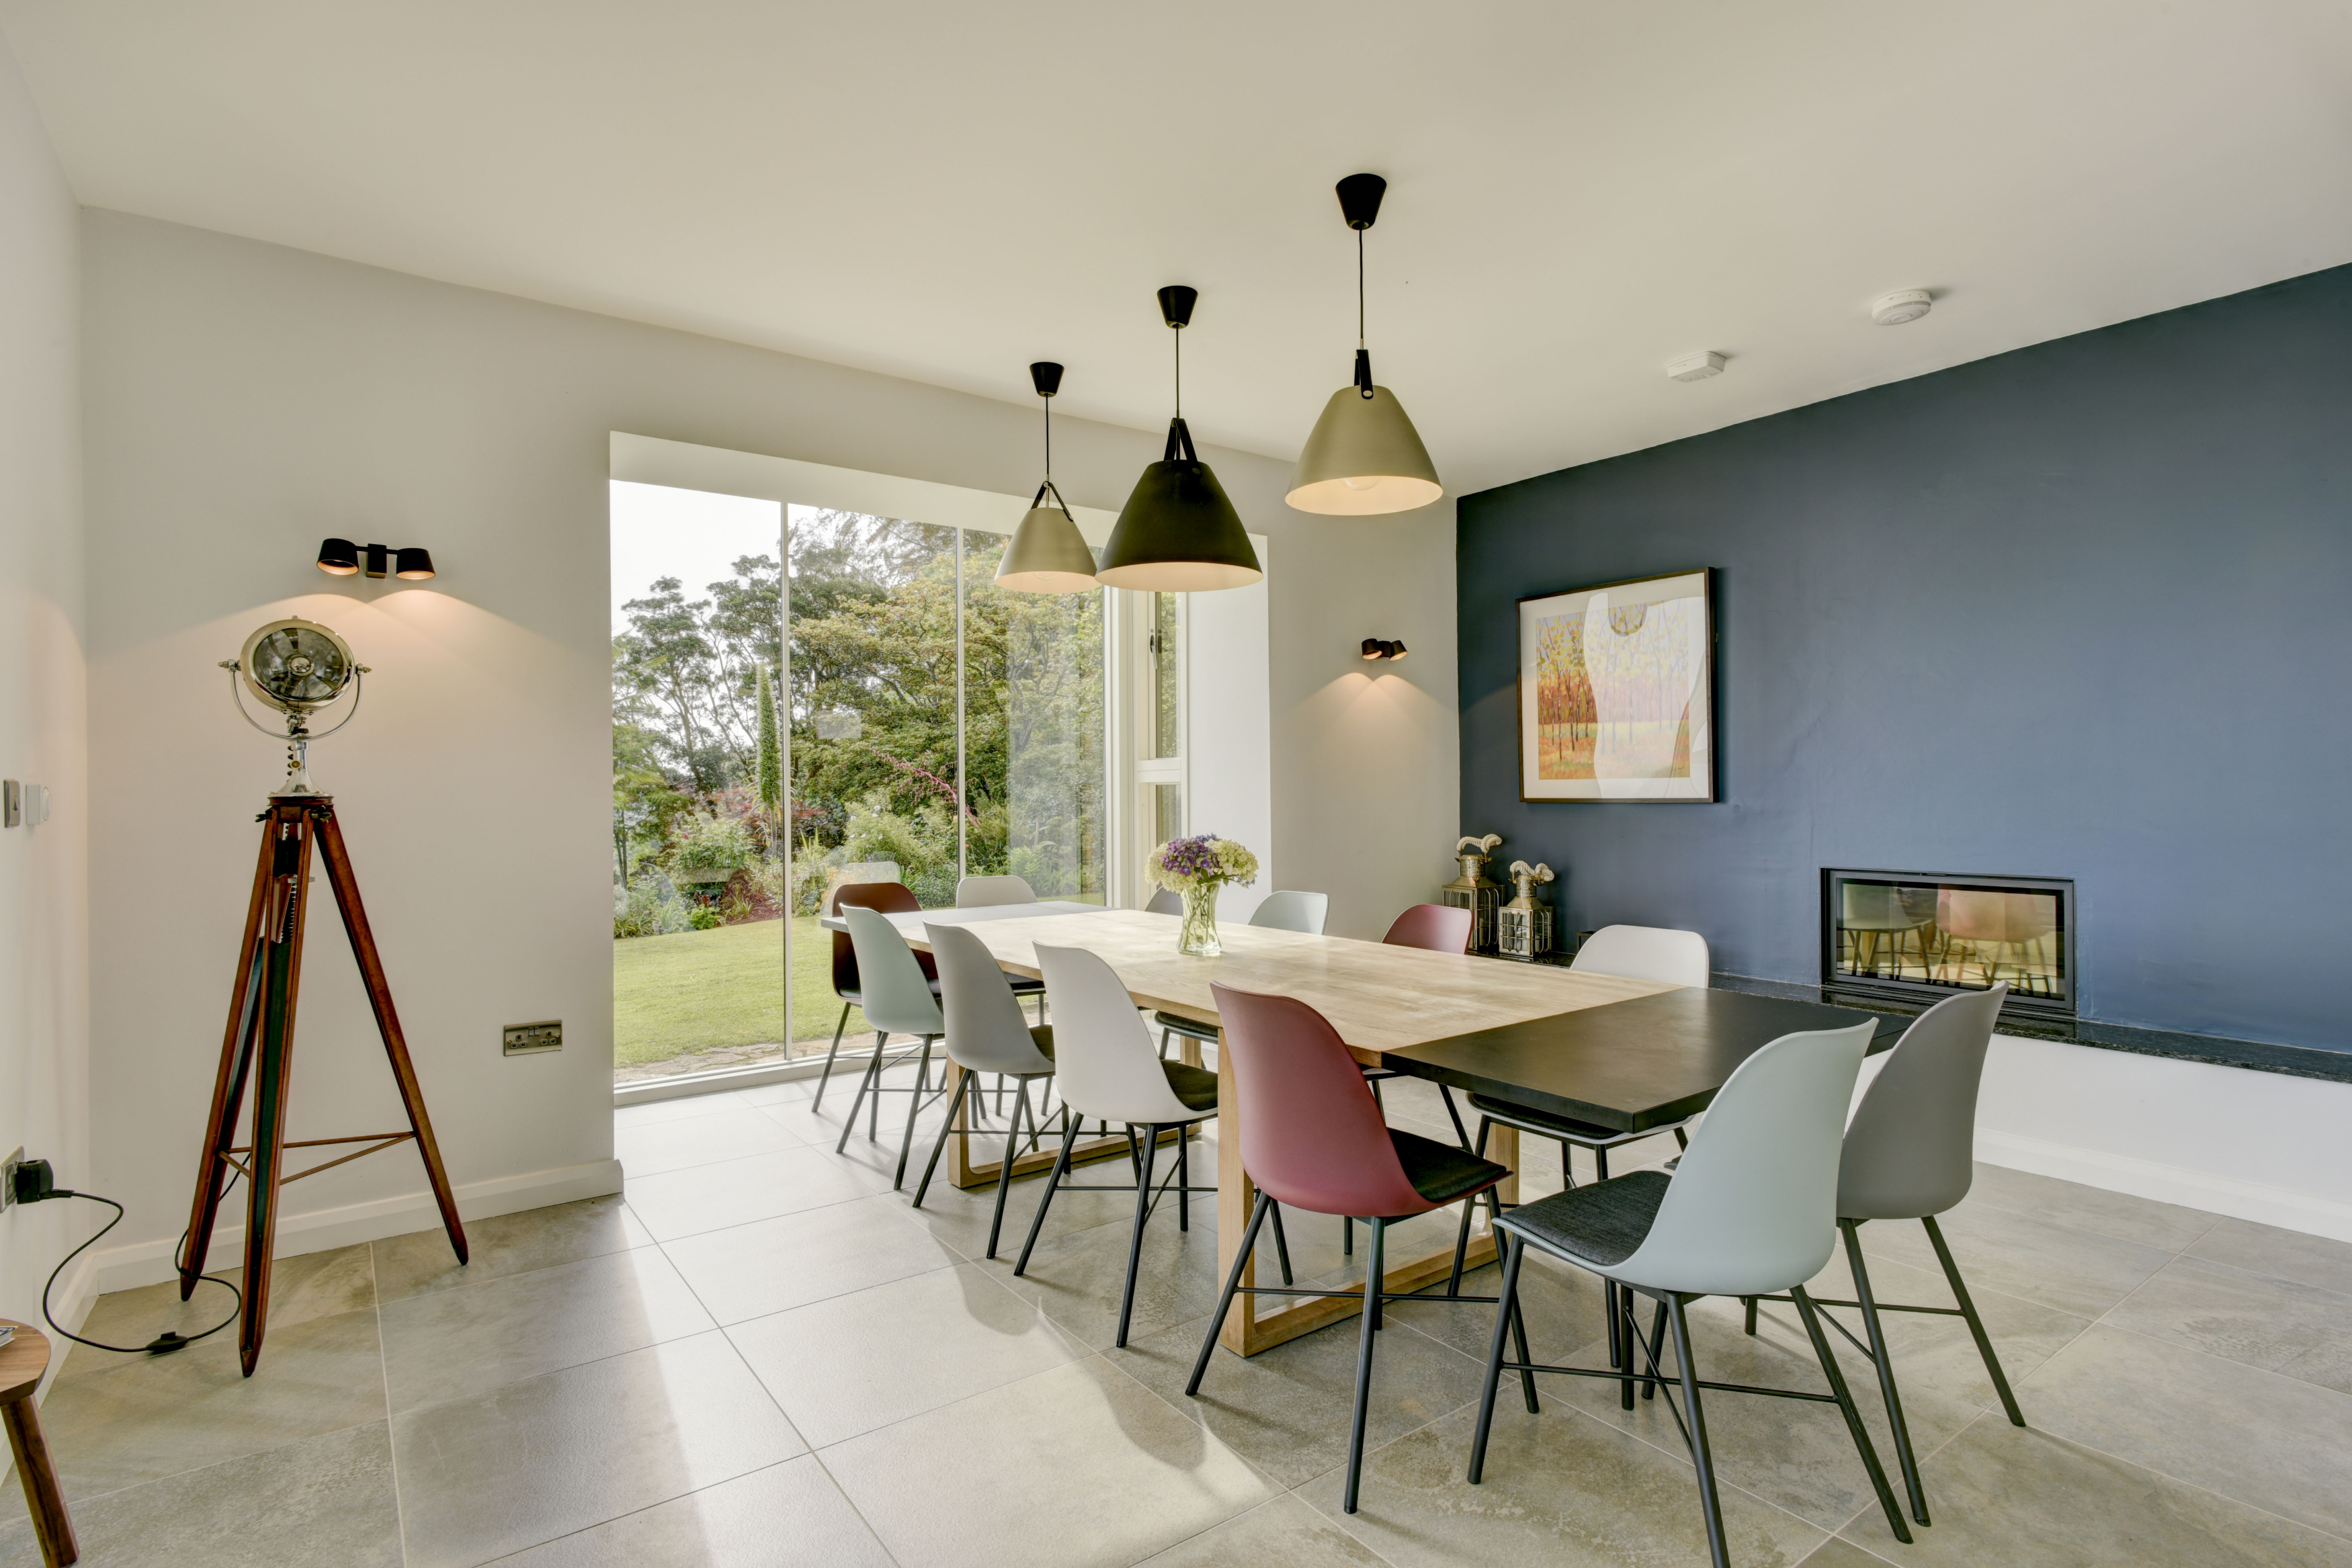 Owlscombe – inside dining for 12 with pretty garden views